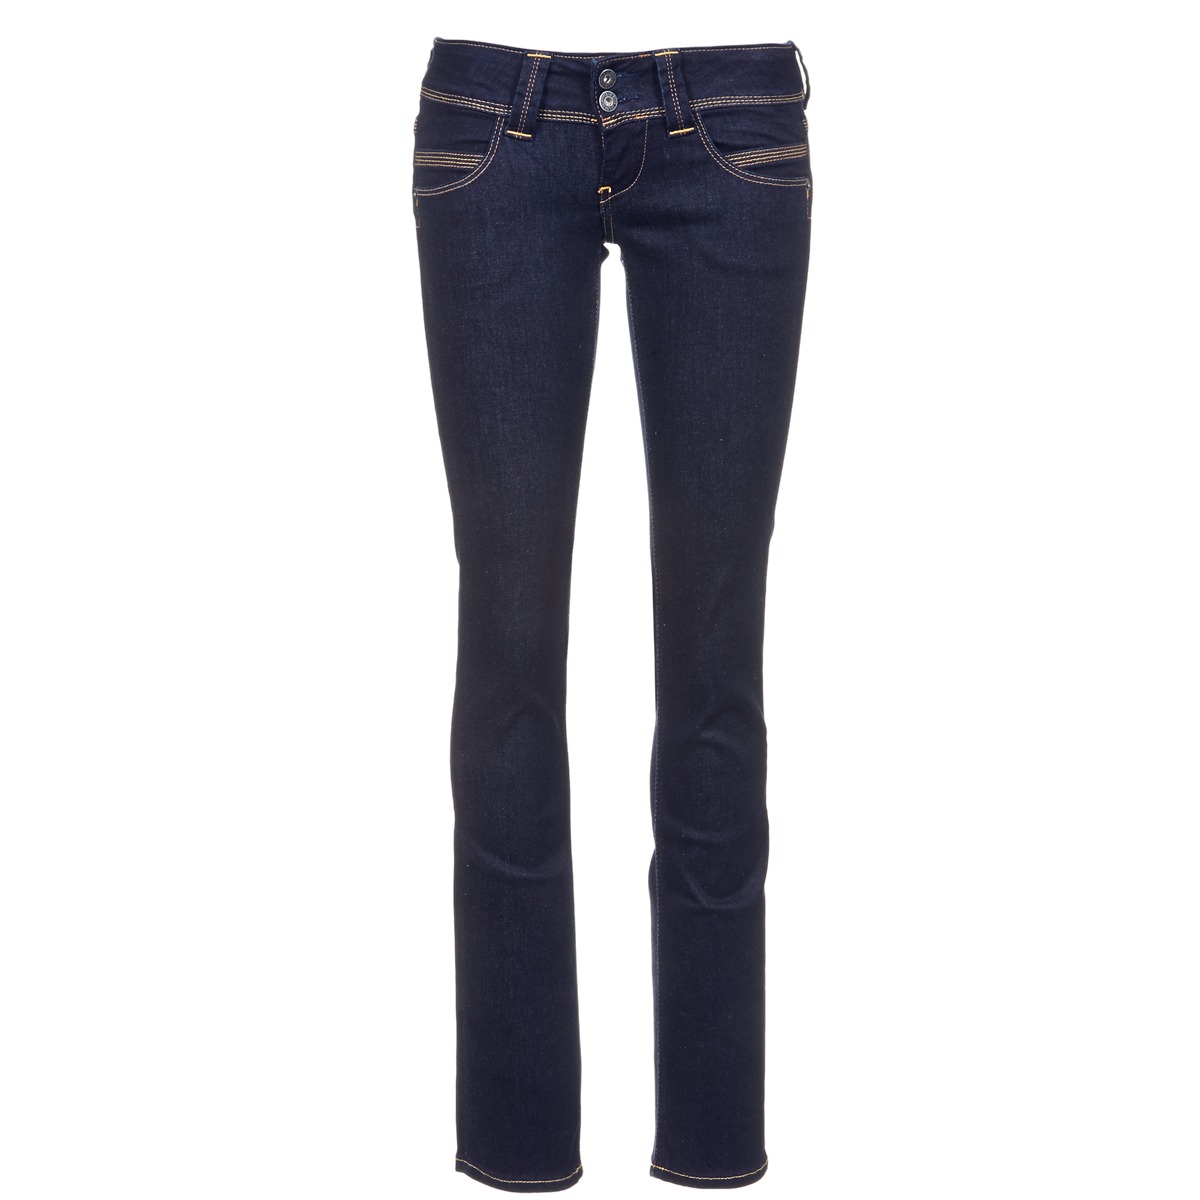 ! delivery straight Clothing VENUS Free NET | jeans M15 - Pepe jeans Spartoo Blue - / Women